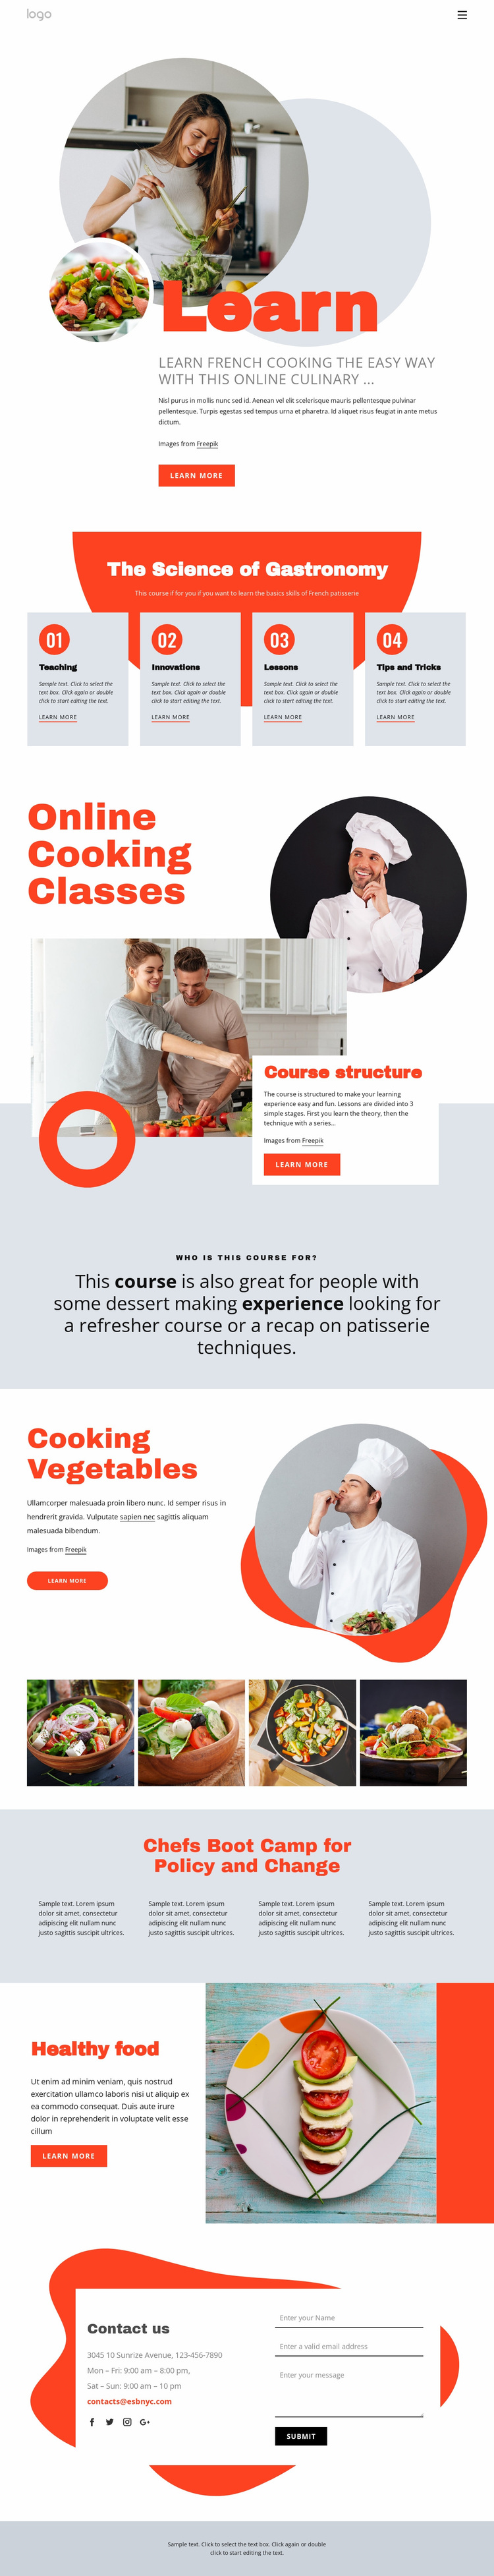 Learn cooking the easy way Website Design